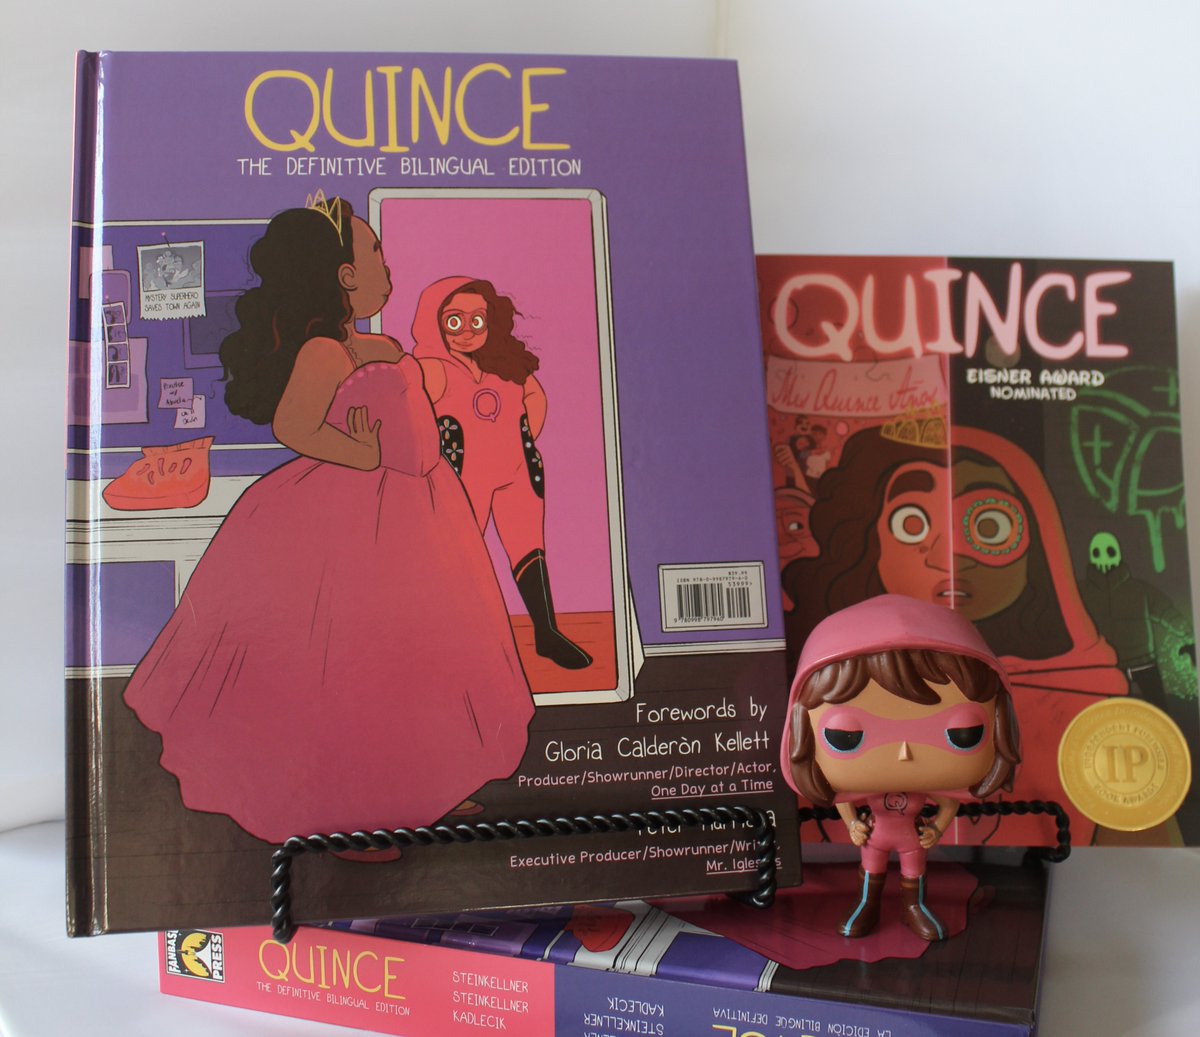 .@QuinceComic: The Definitive #Bilingual Edition hardcover contains BOTH the Spanish & English versions of the Eisner-nominated series! In print on @Fanbase_Press & @amazon! #Quince #EduComix #LibComix #quinceañera #Comics #Latinx #Schools #Libraries fanbasepress.ecrater.com/p/34892900/qui…